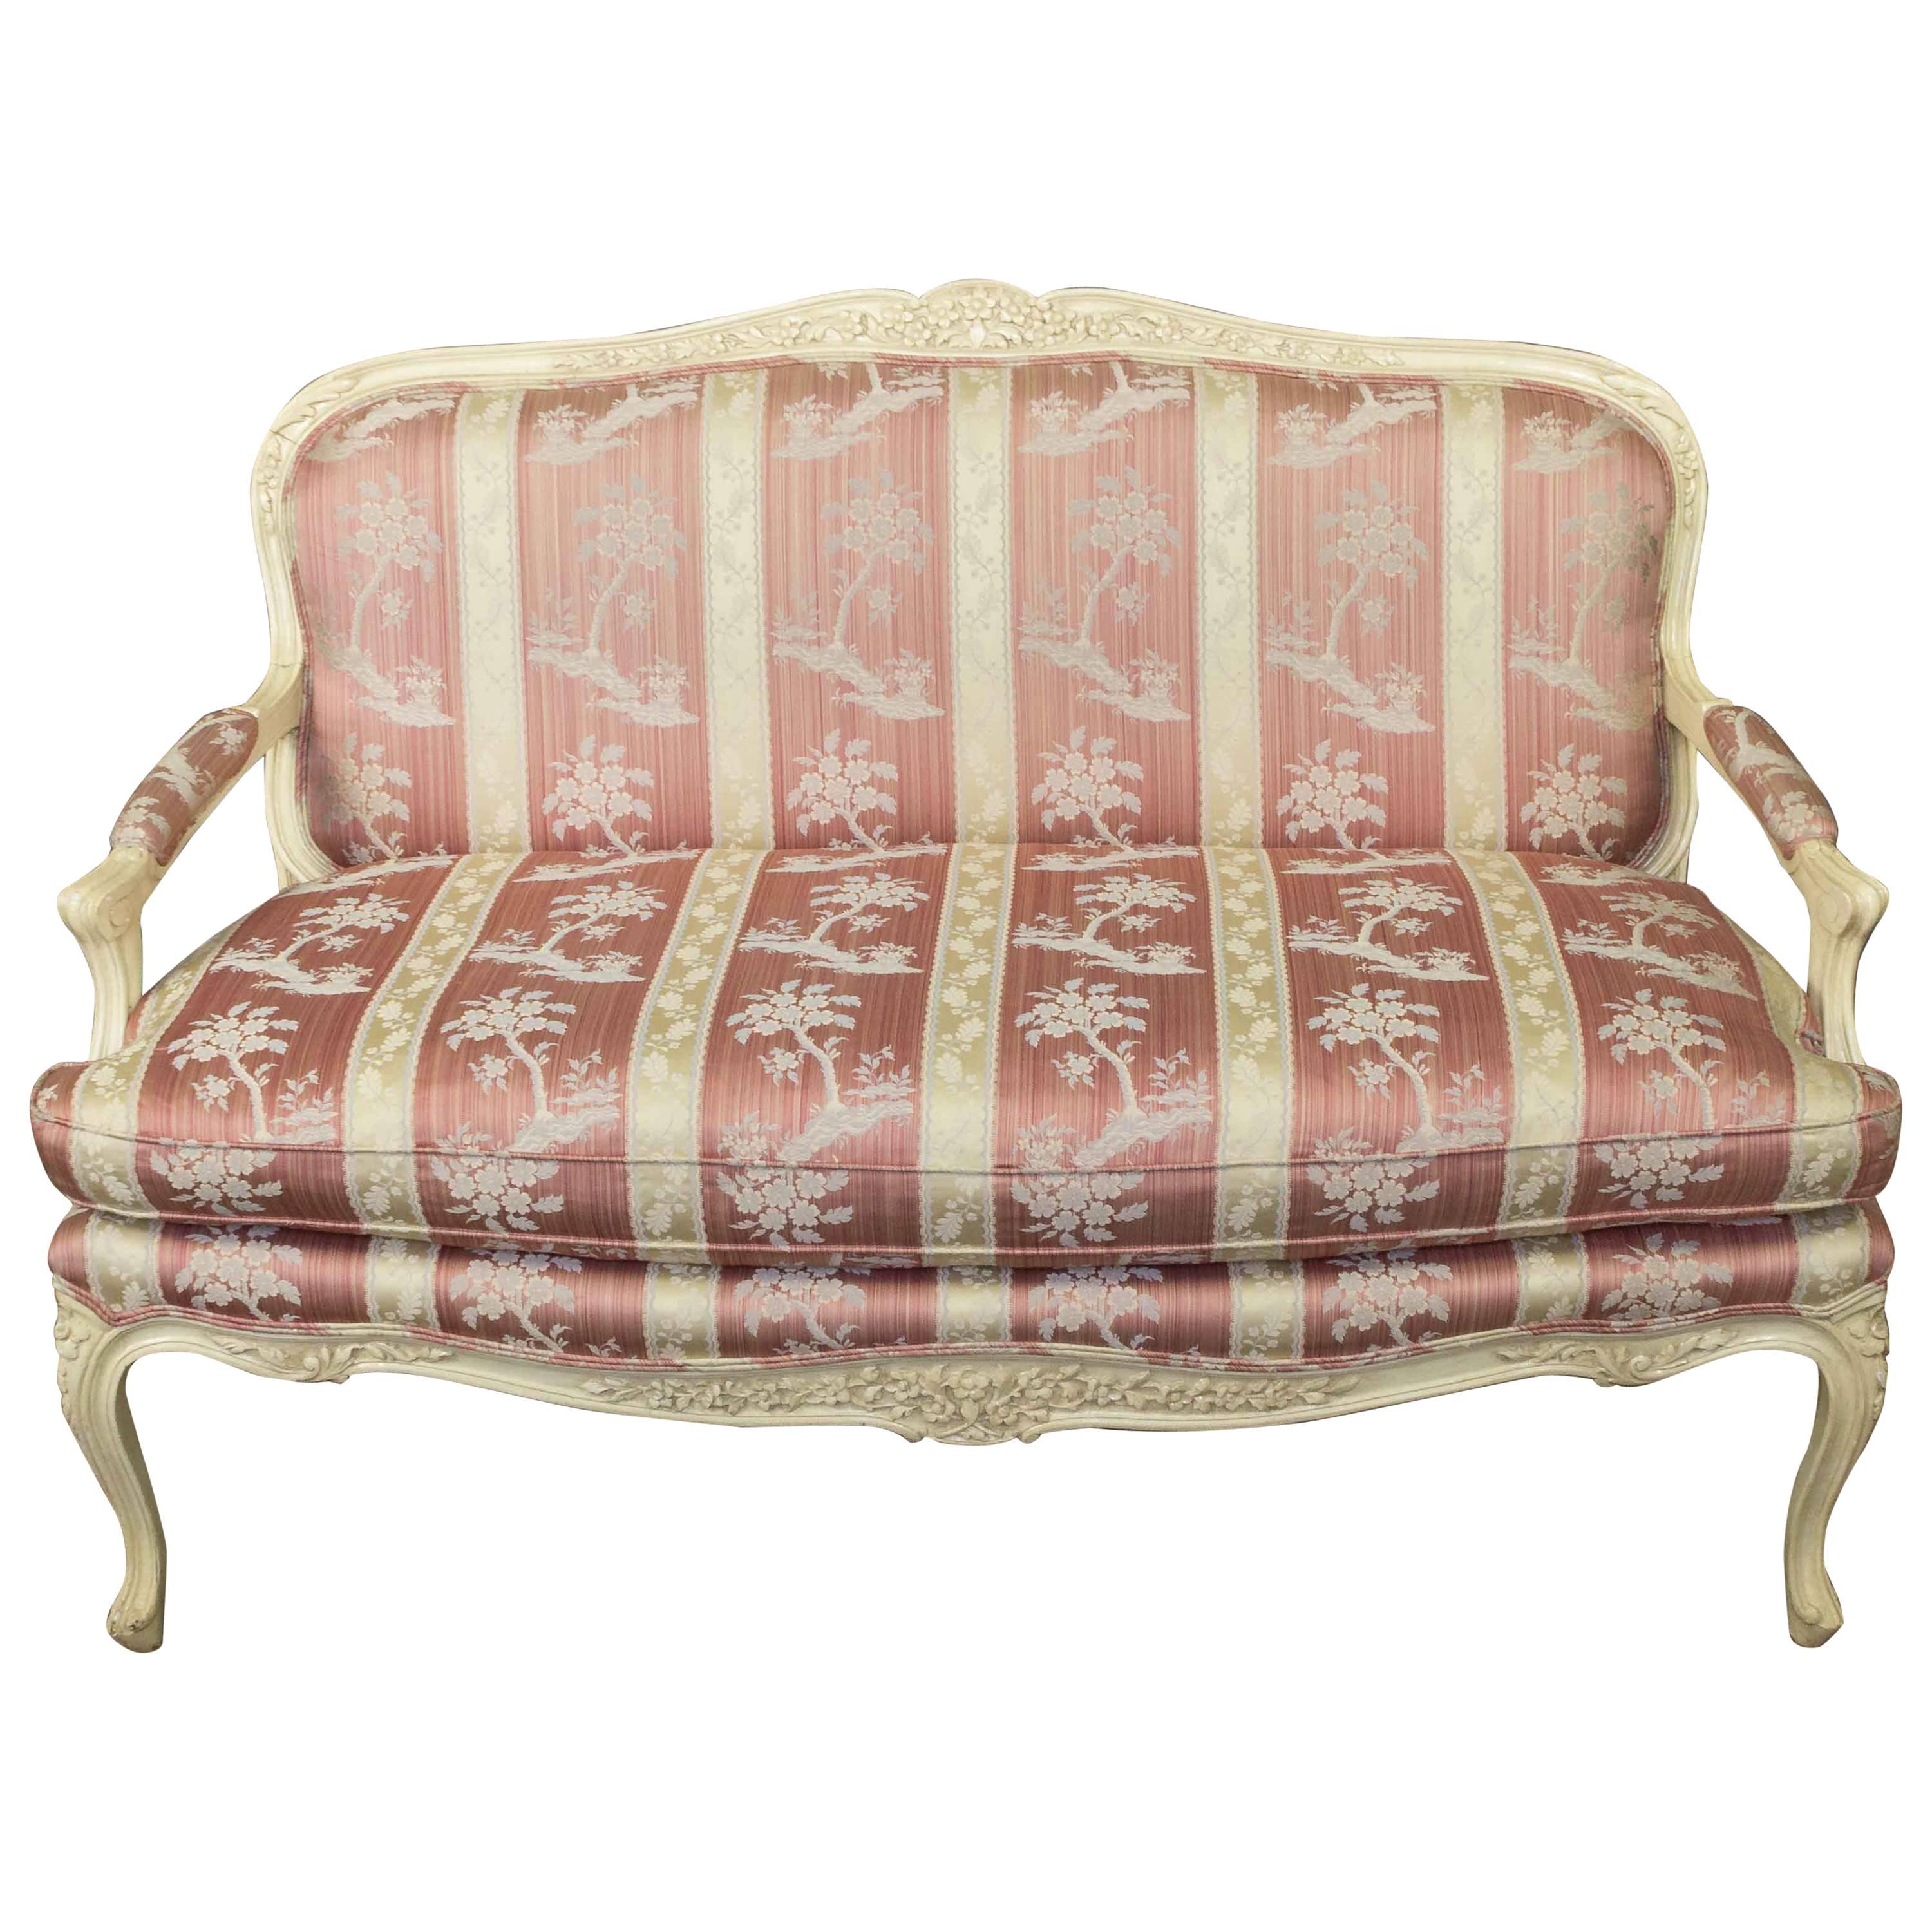 Louis XV Style Settee with Painted Finish